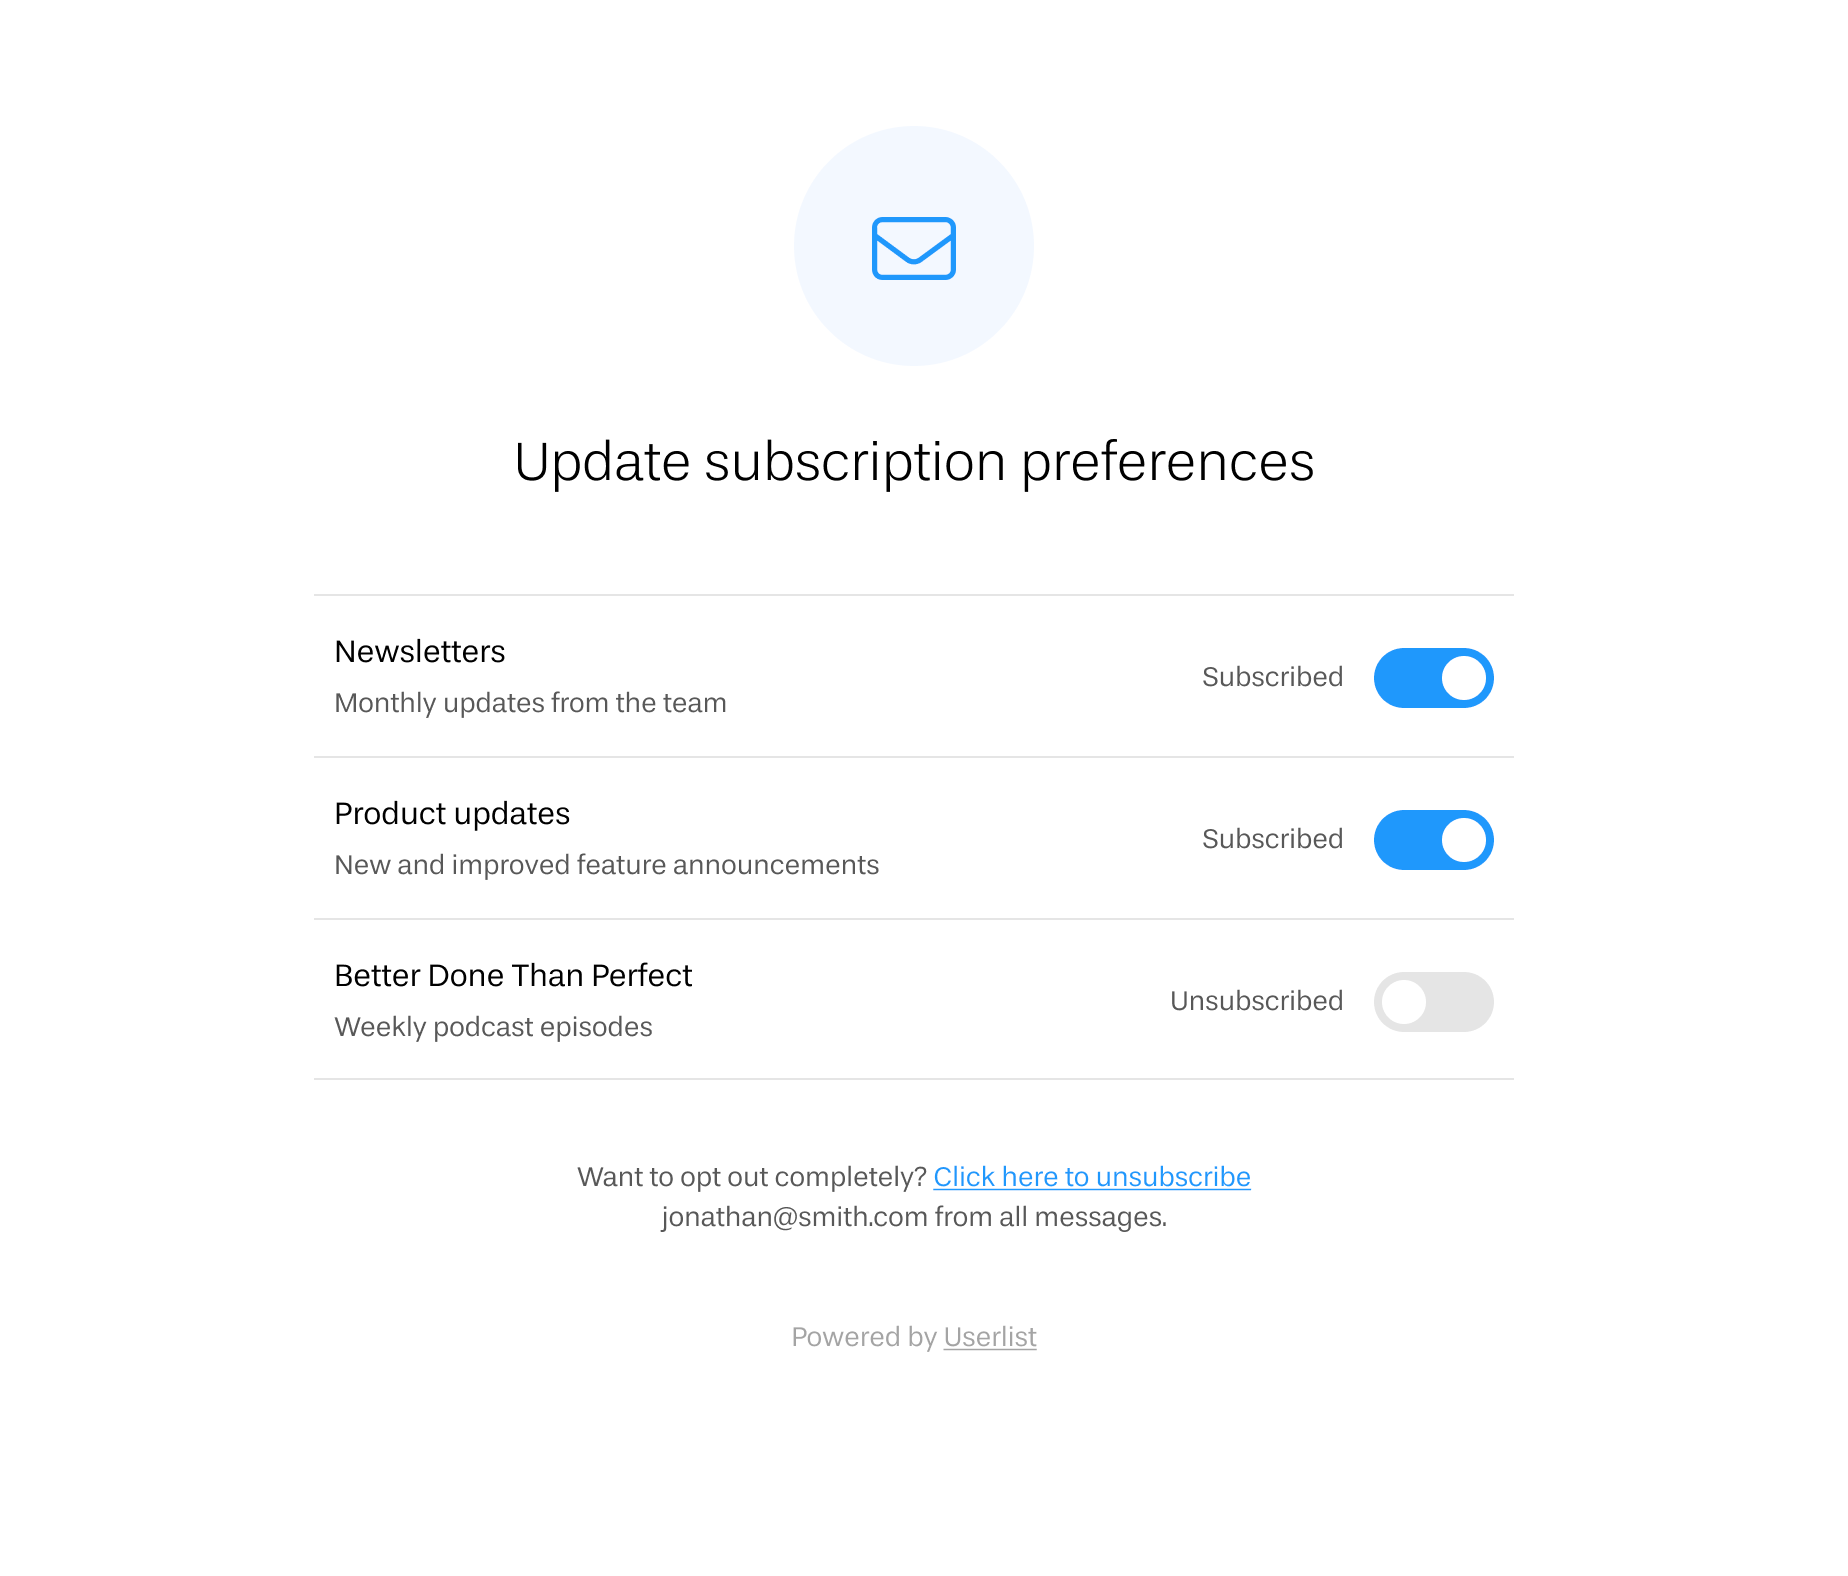 Display a subscription preference center